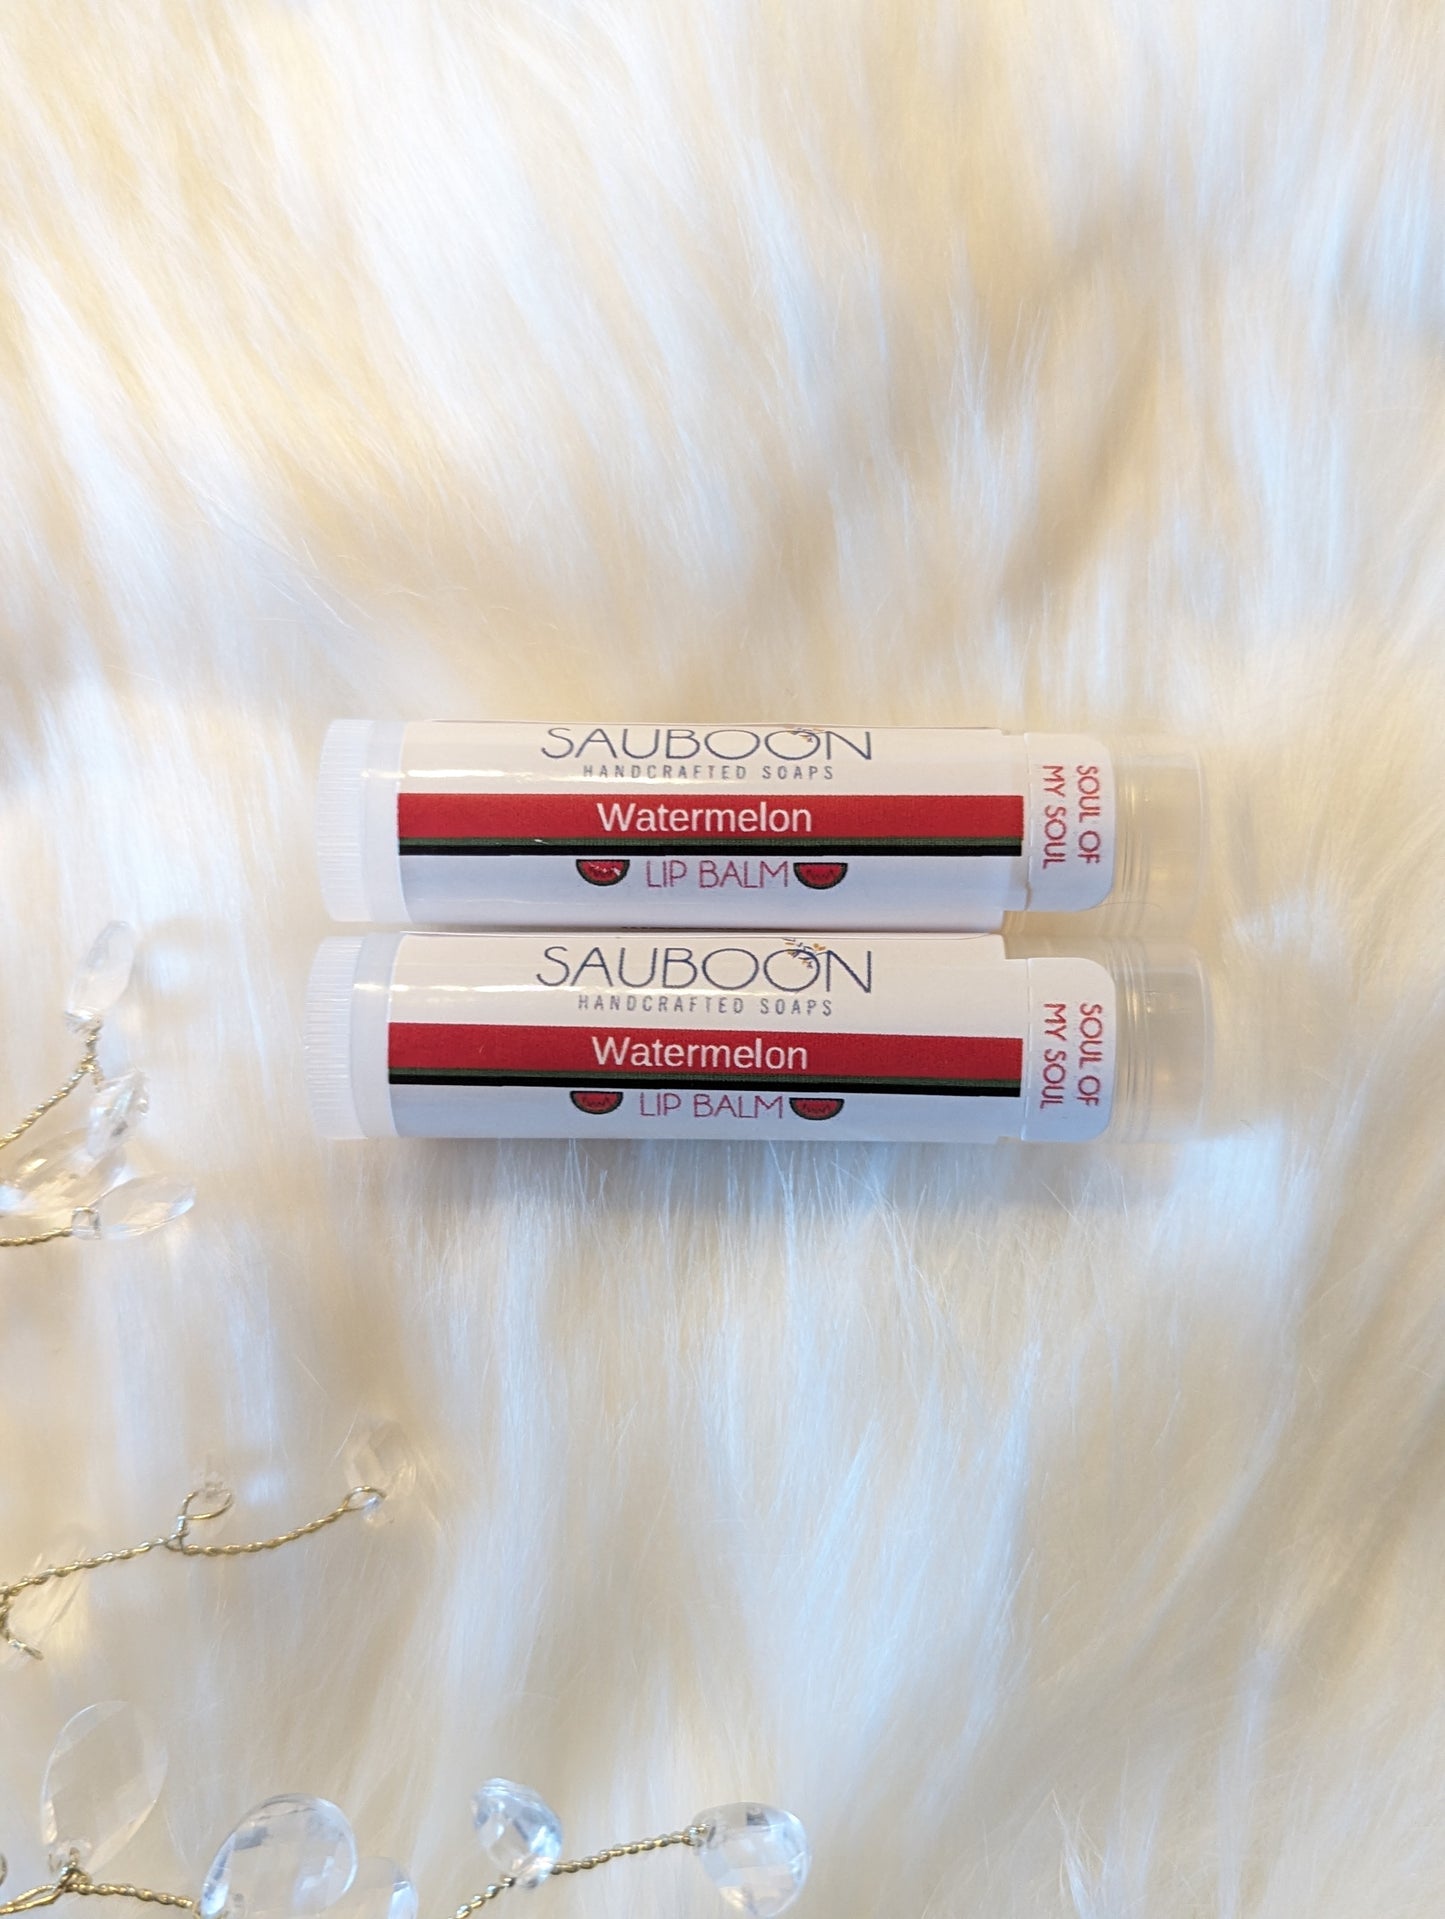 Our lip balms are very moisturizing & soothing on lips. Created using superior ingredients to keep your lips hydrated & protected while being outdoors.  Natural, luxurious, and nourishing.  The perfect little gift or treat for yourself!